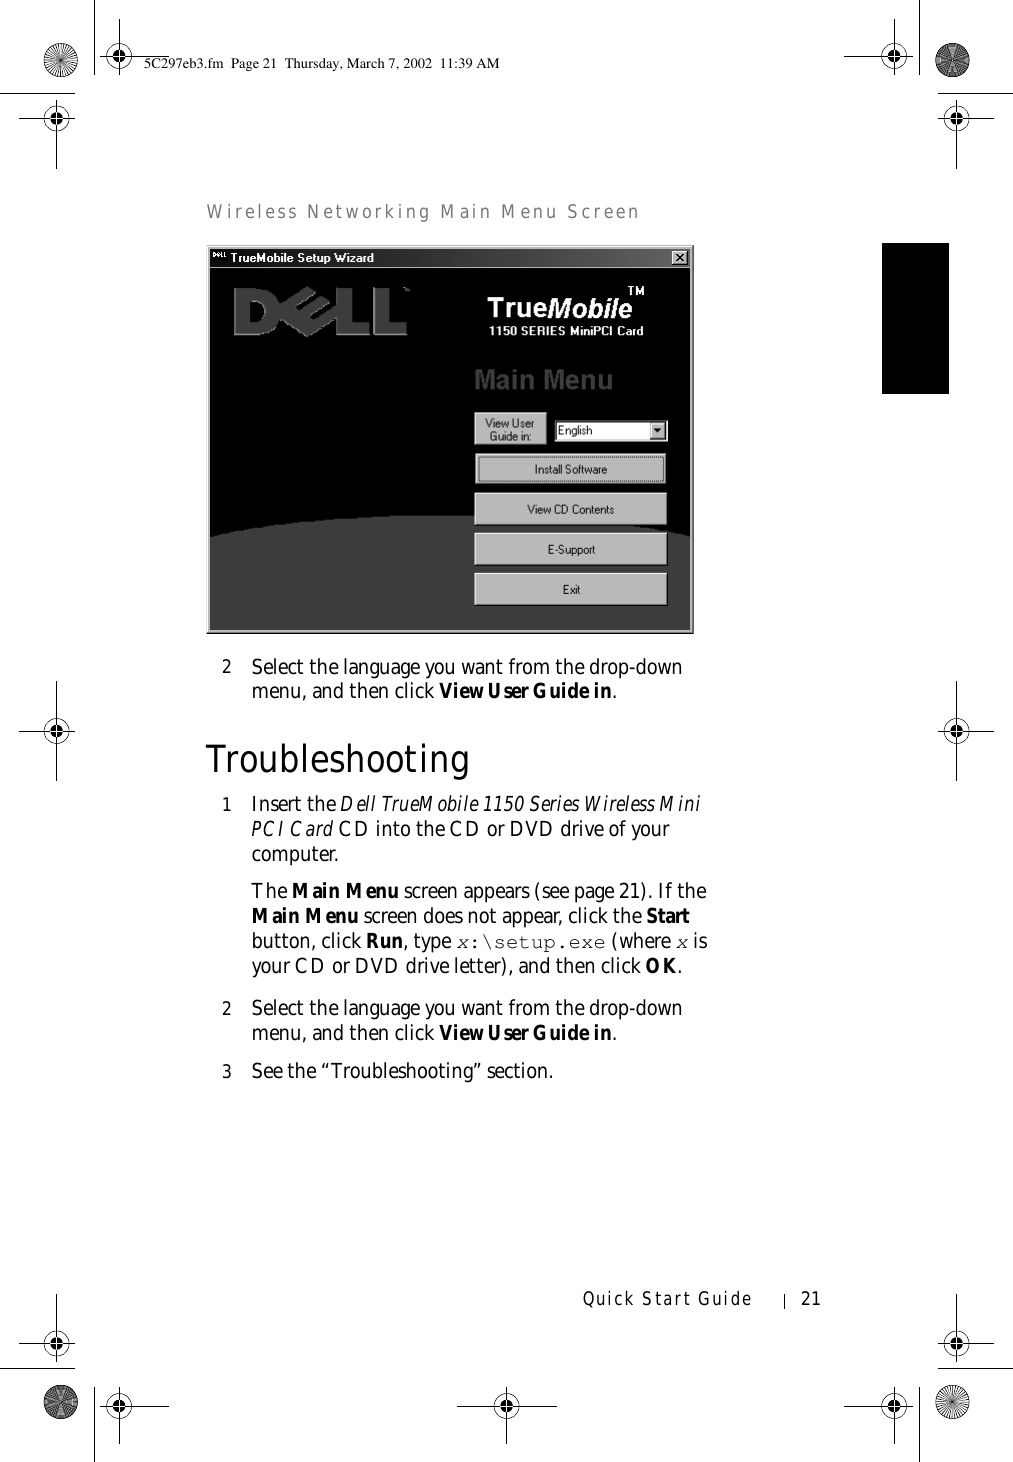 Quick Start Guide 21Wireless Networking Main Menu Screen2Select the language you want from the drop-down menu, and then click View User Guide in.Troubleshooting1Insert the Dell TrueMobile 1150 Series Wireless Mini PCI Card CD into the CD or DVD drive of your computer. The Main Menu screen appears (see page 21). If the Main Menu screen does not appear, click the Start button, click Run, type x:\setup.exe (where x is your CD or DVD drive letter), and then click OK.2Select the language you want from the drop-down menu, and then click View User Guide in. 3See the “Troubleshooting” section.5C297eb3.fm  Page 21  Thursday, March 7, 2002  11:39 AM